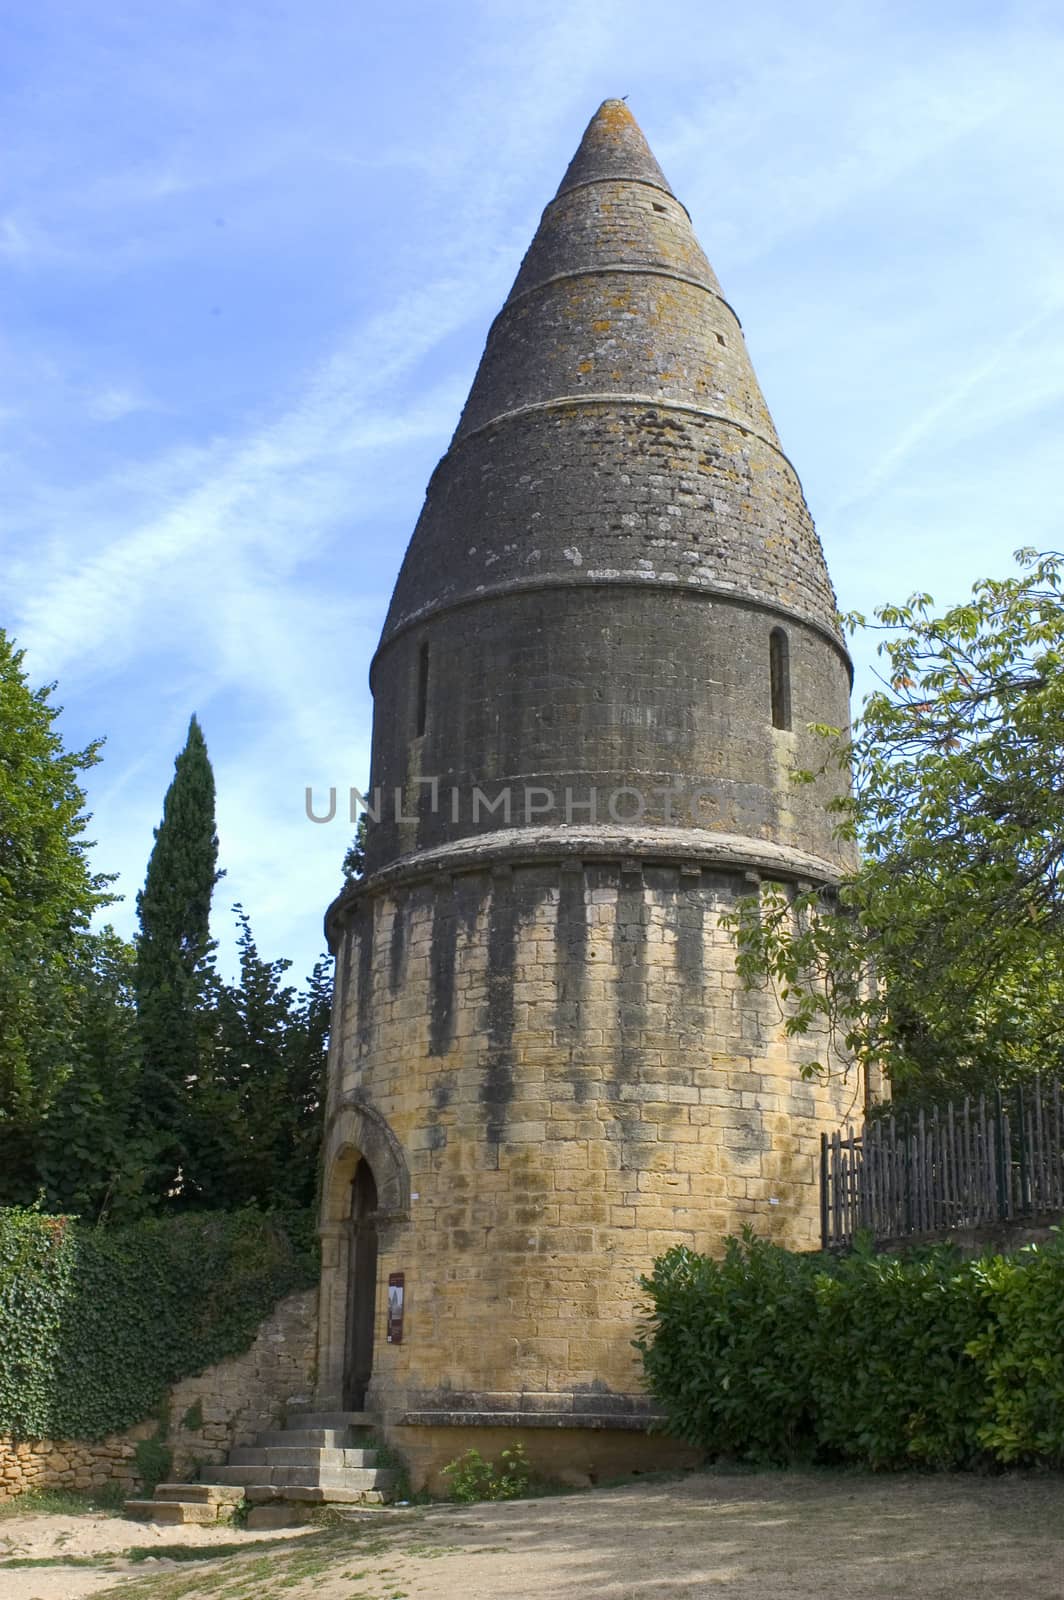 The lantern of the dead, a monument of Sarlat